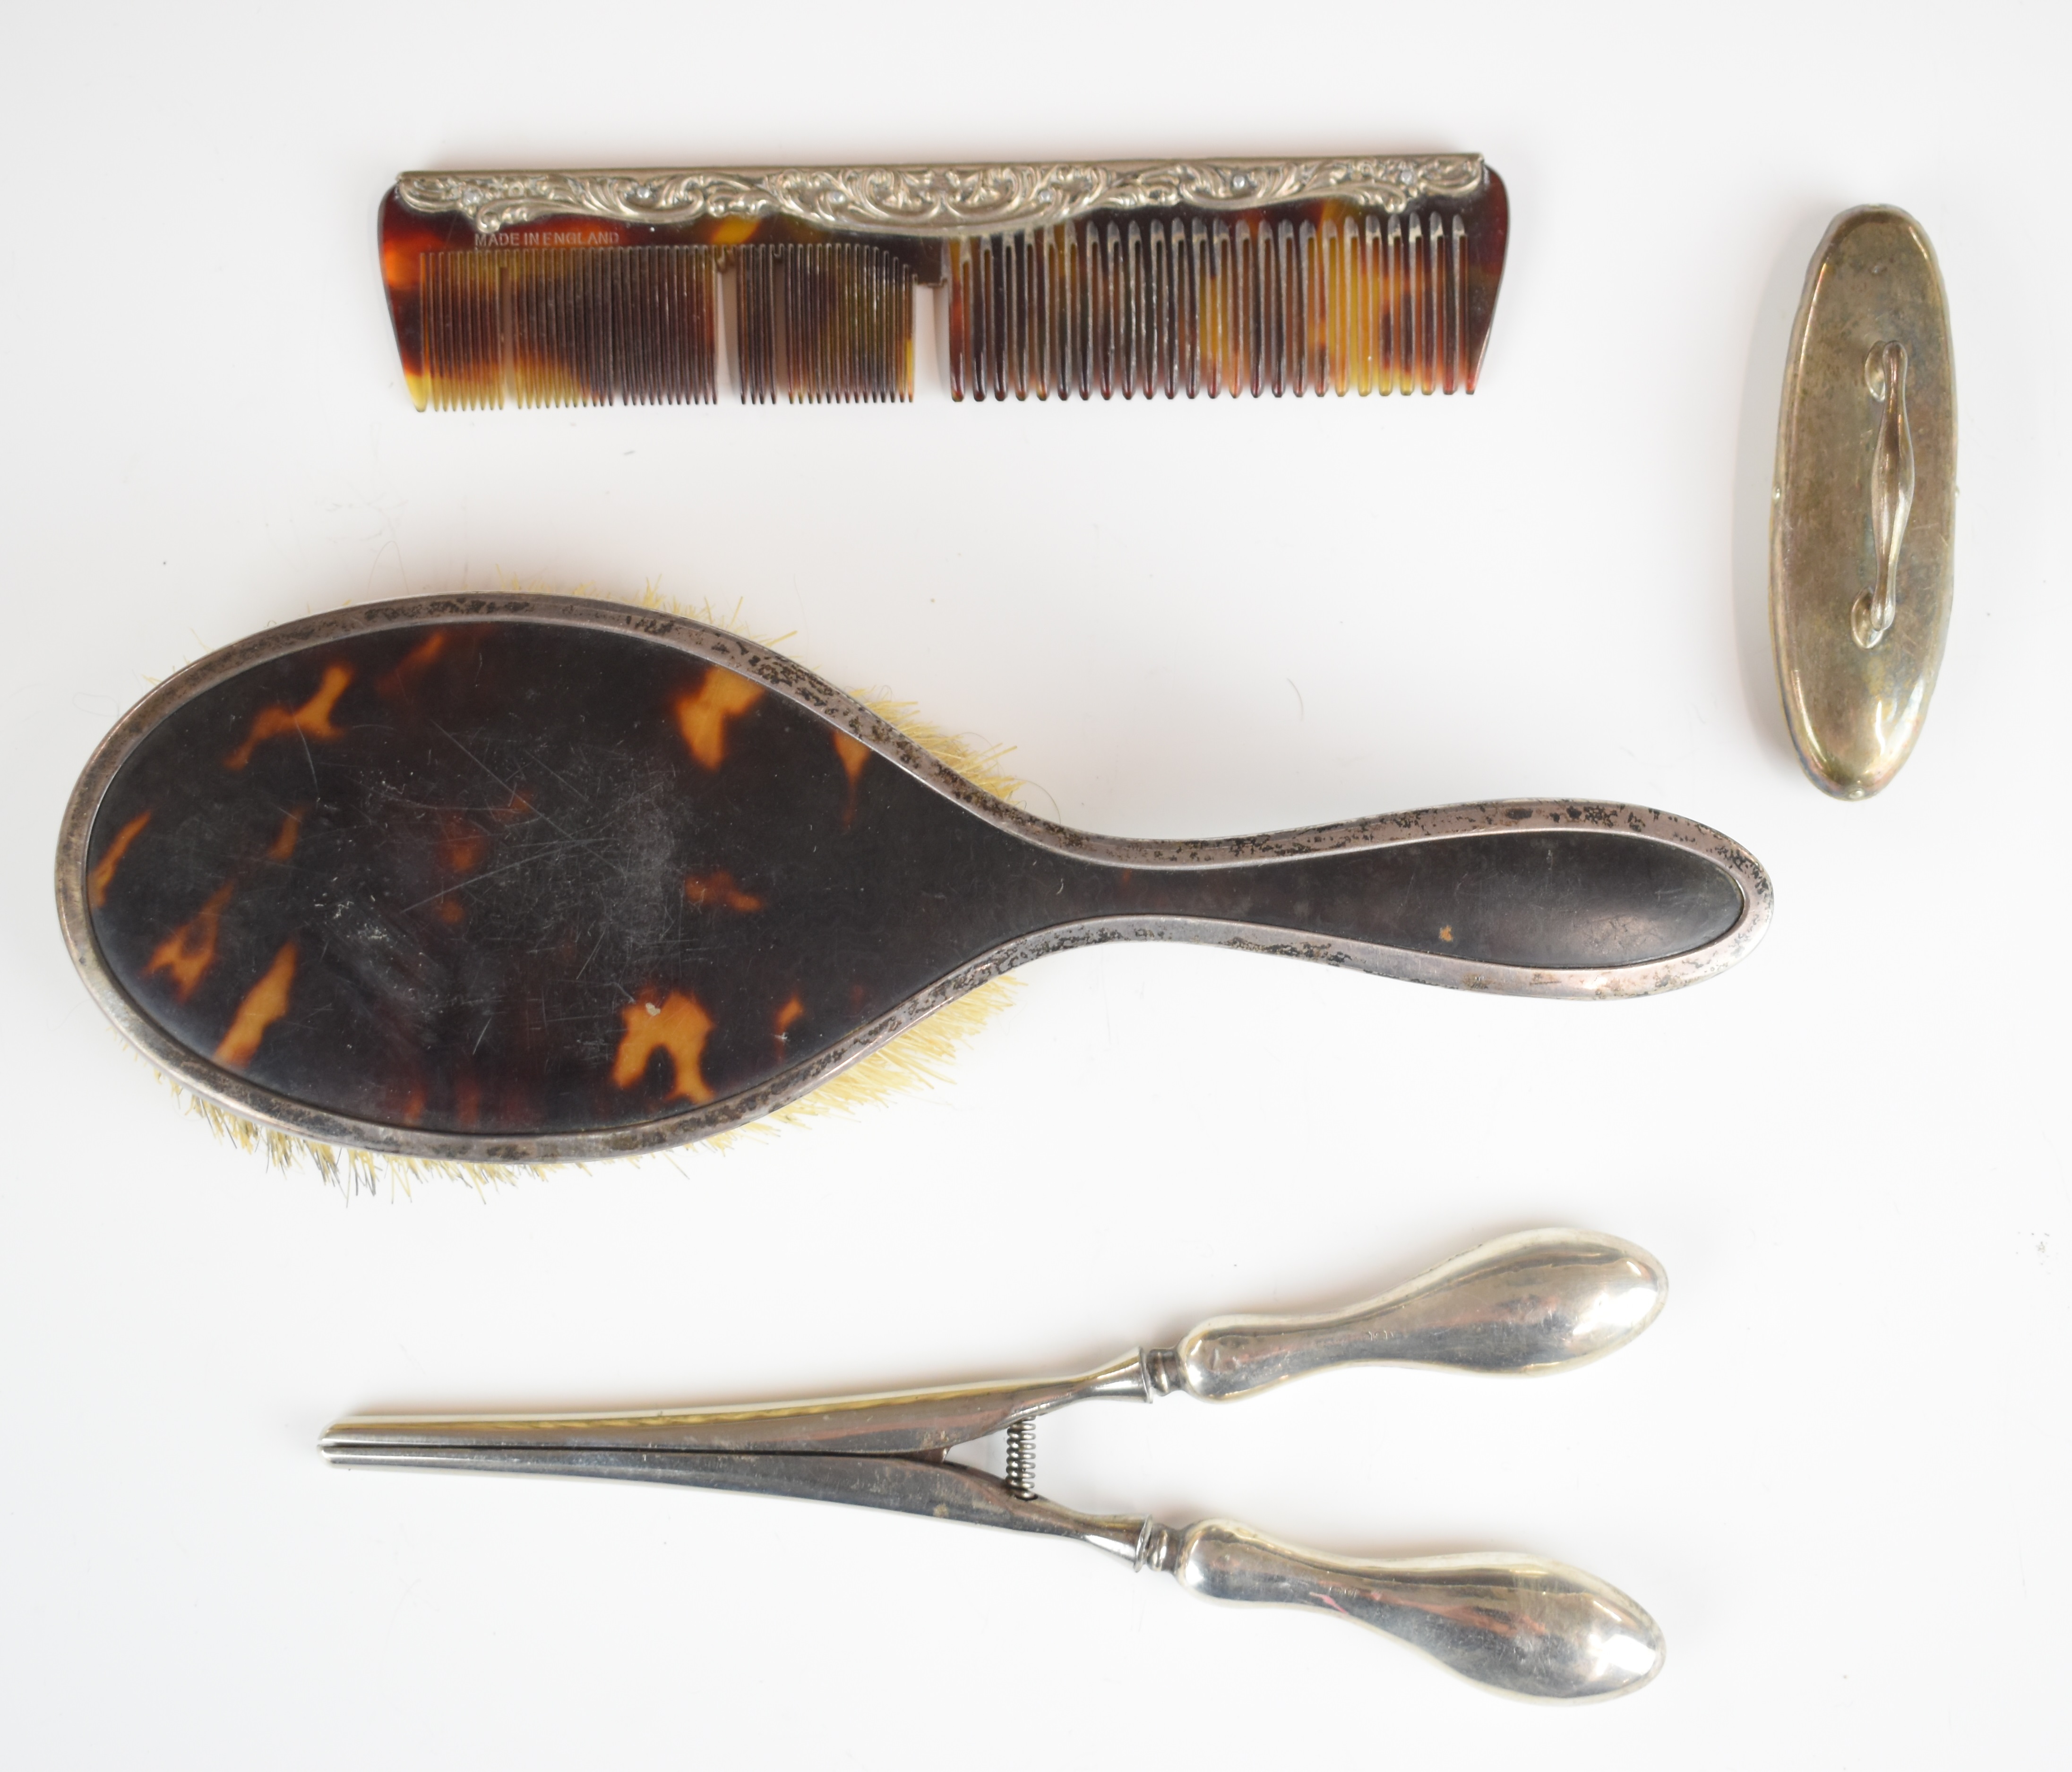 Hallmarked silver mounted and handled items including knives, brush, comb, dressing table bottles - Image 3 of 4